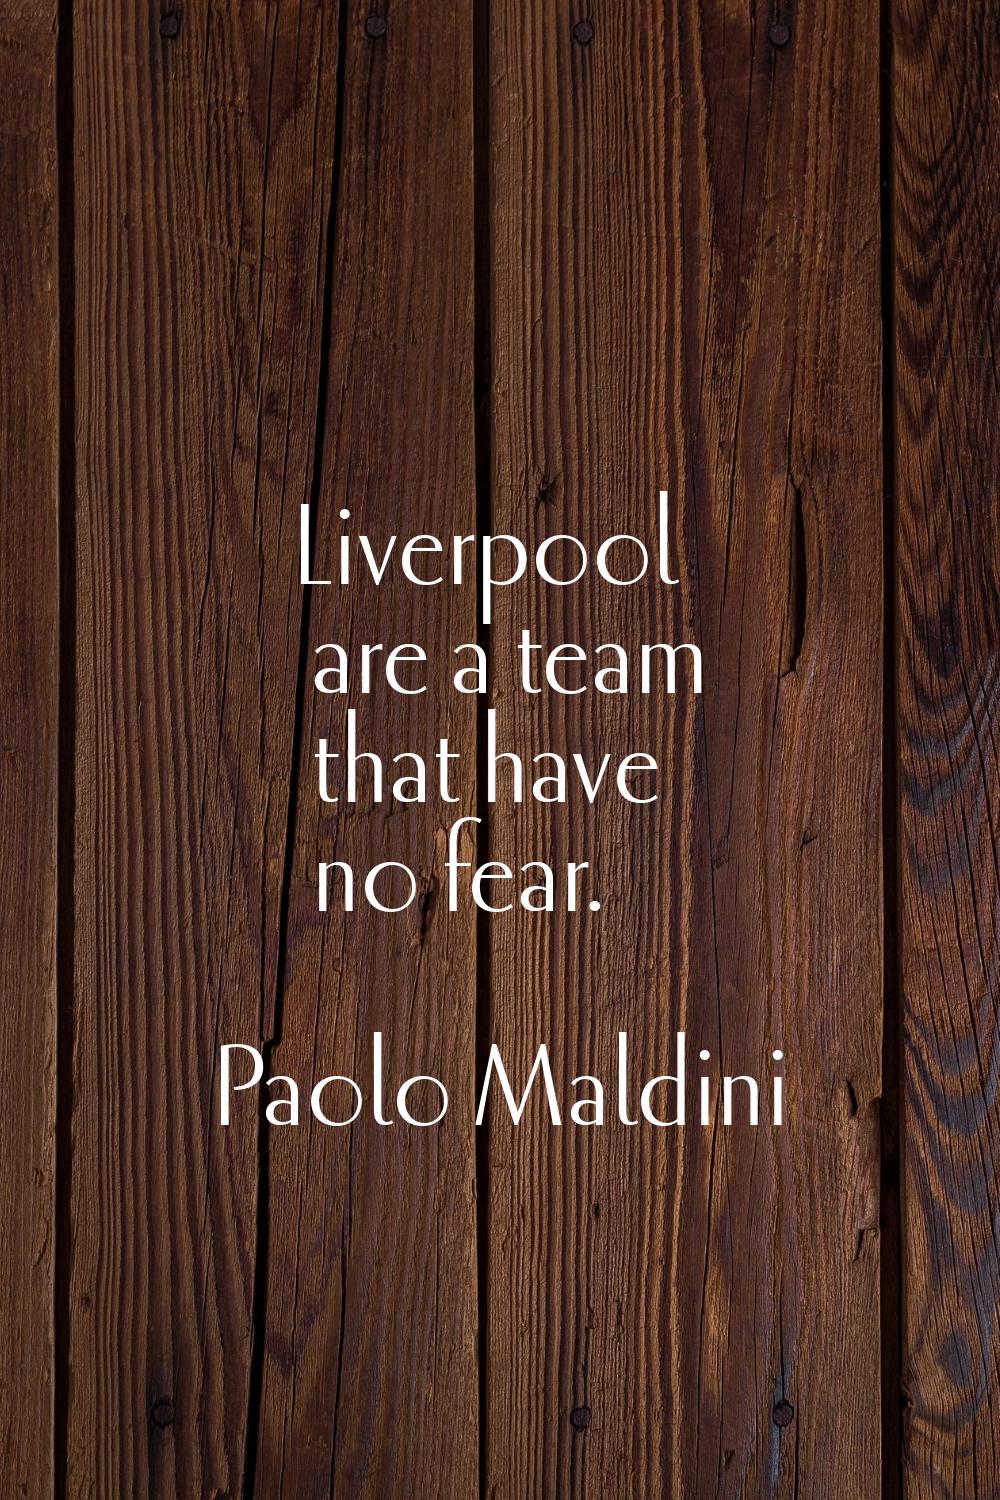 Liverpool are a team that have no fear.